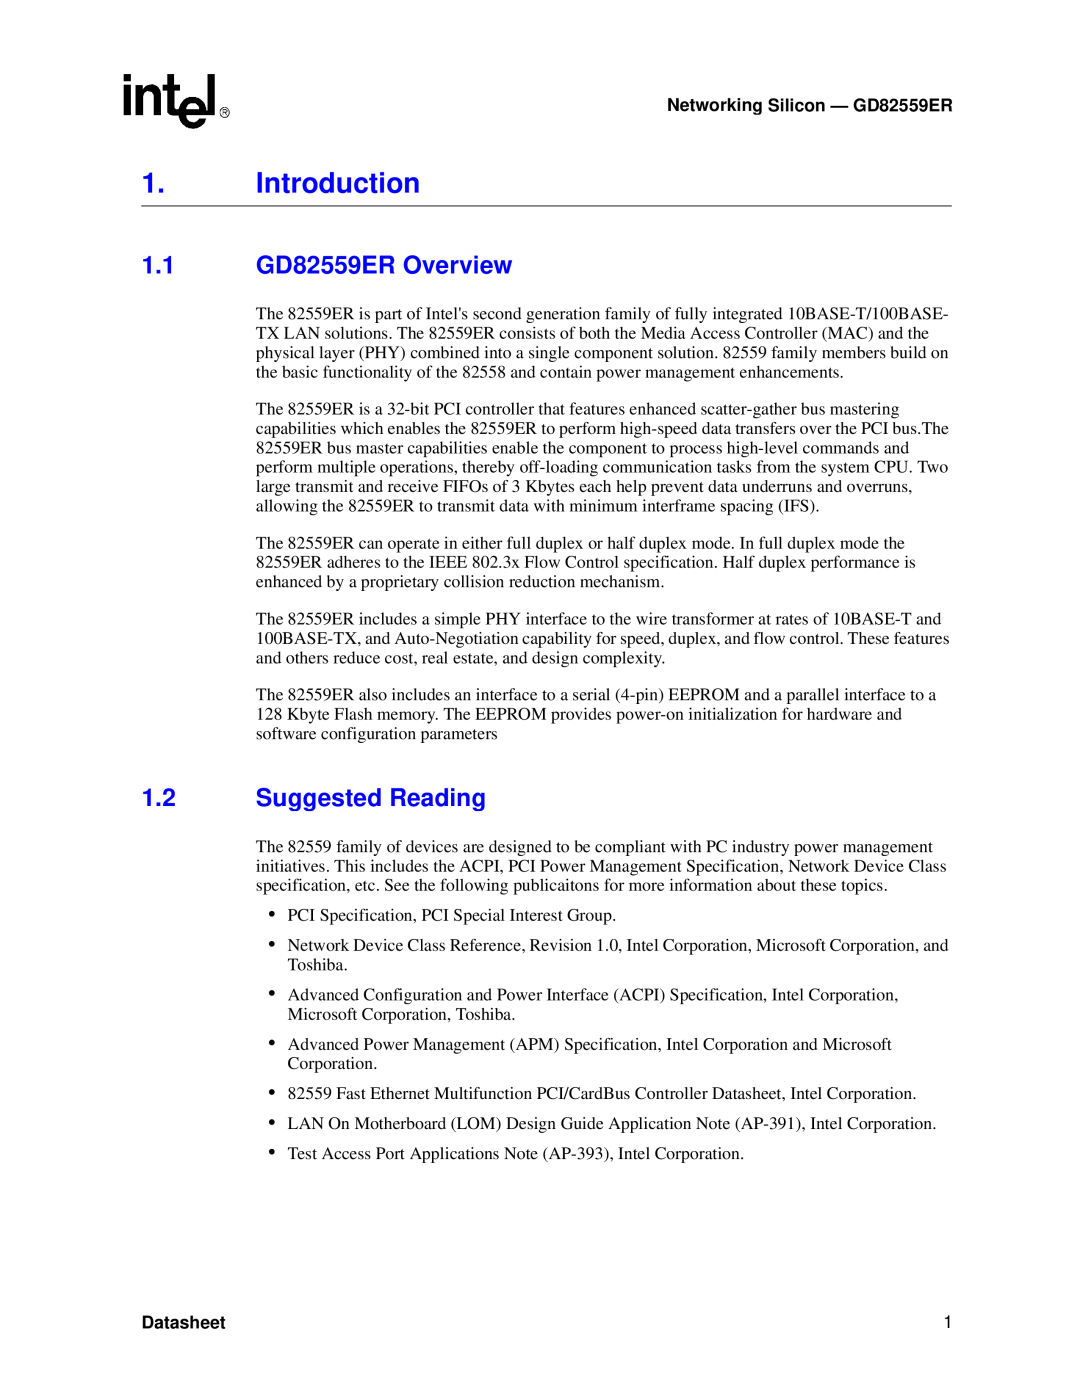 Intel manual Introduction, 1.1 GD82559ER Overview, Suggested Reading, Networking Silicon - GD82559ER, Datasheet 